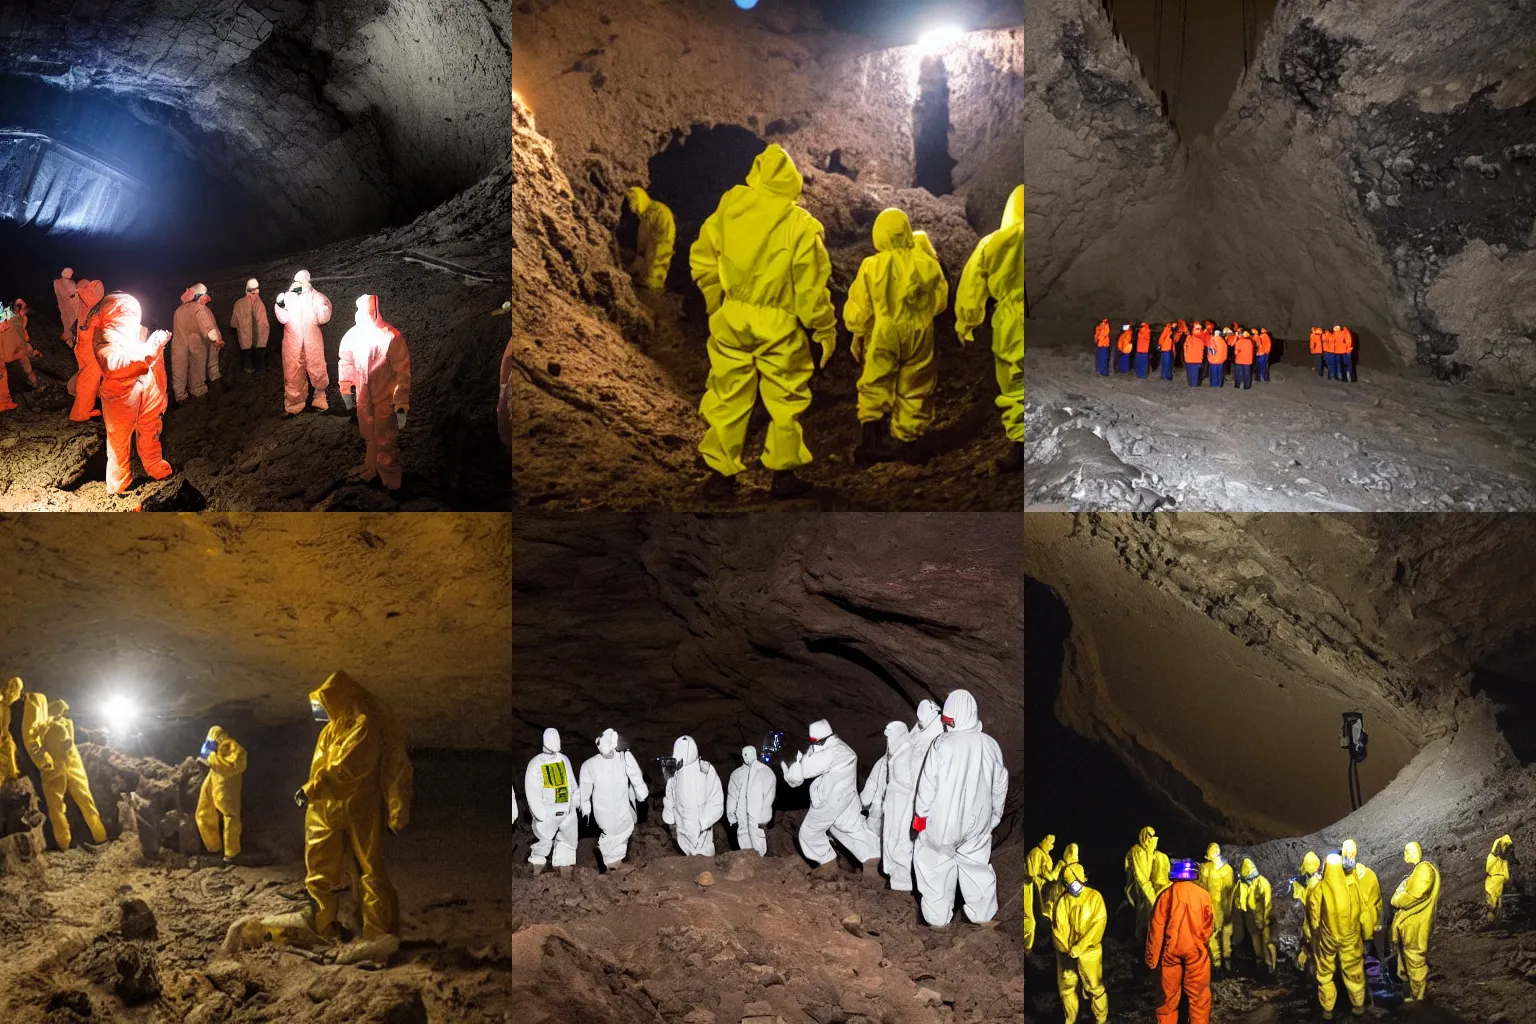 Prompt: People in hazmat suits holding flashlights inspecting massive alien structures in the dark depths of a pit